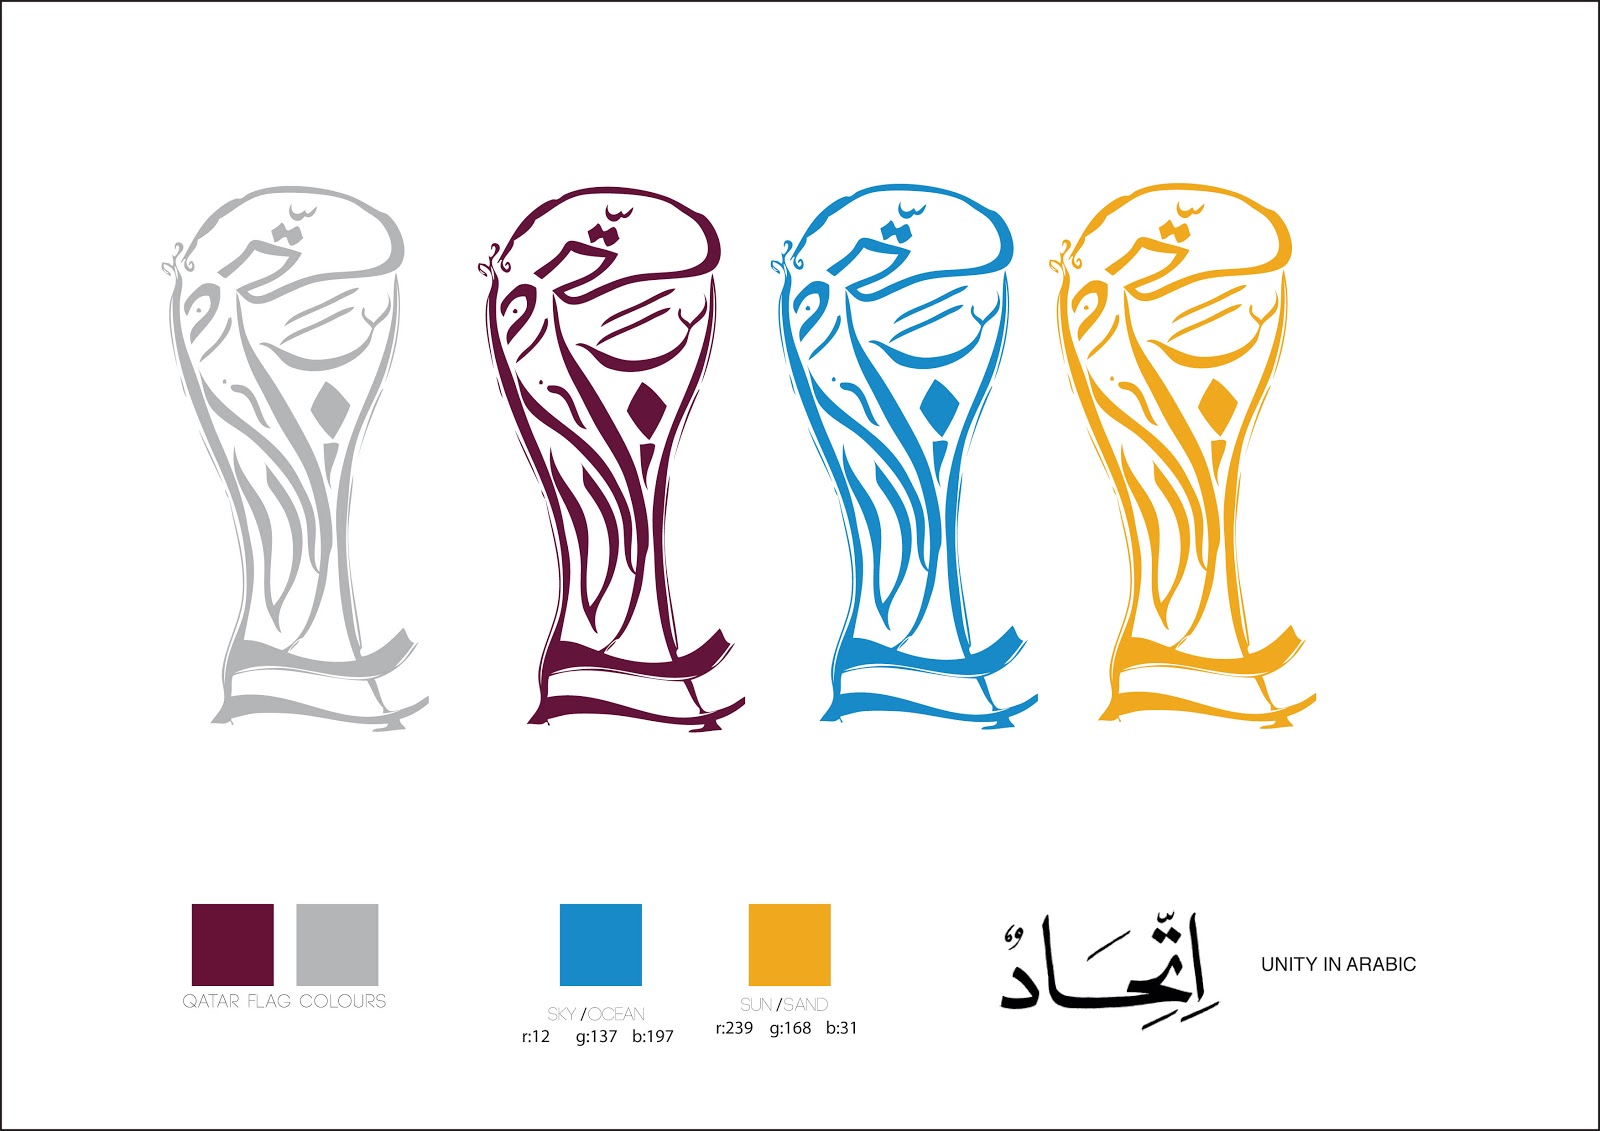 How to draw FIFA World Cup 2022 logo - Step by Step - SHN Best Art 